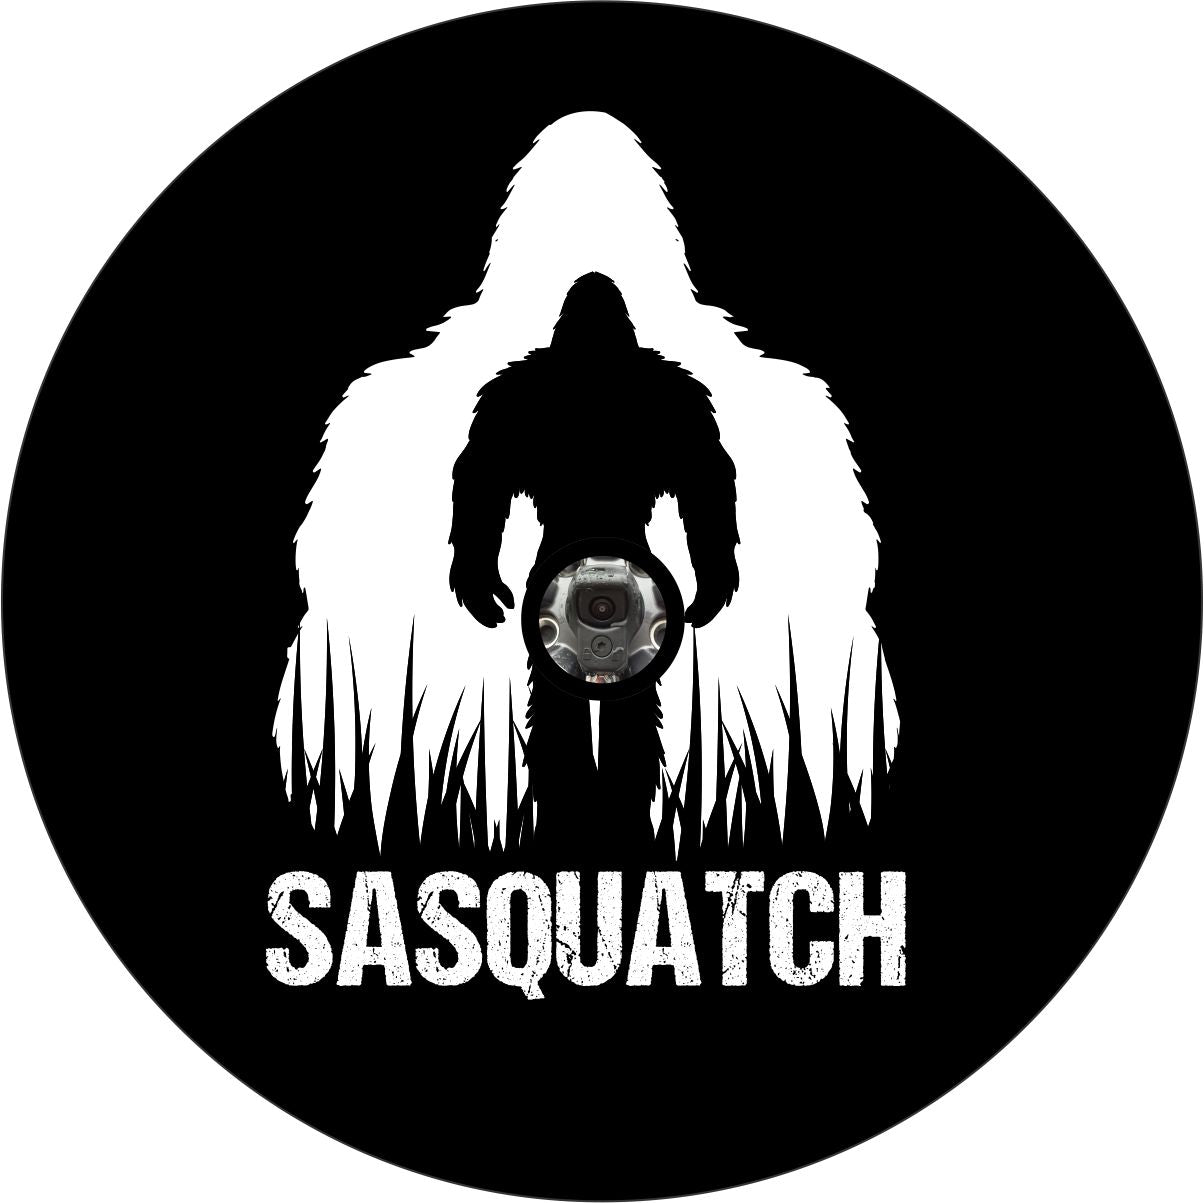 Vinyl spare tire cover design with Sasquatch silhouette double exposed in white and black with the word "Sasquatch" across the bottom and a hole for a vehicle that has a back up camera in their spare wheel.